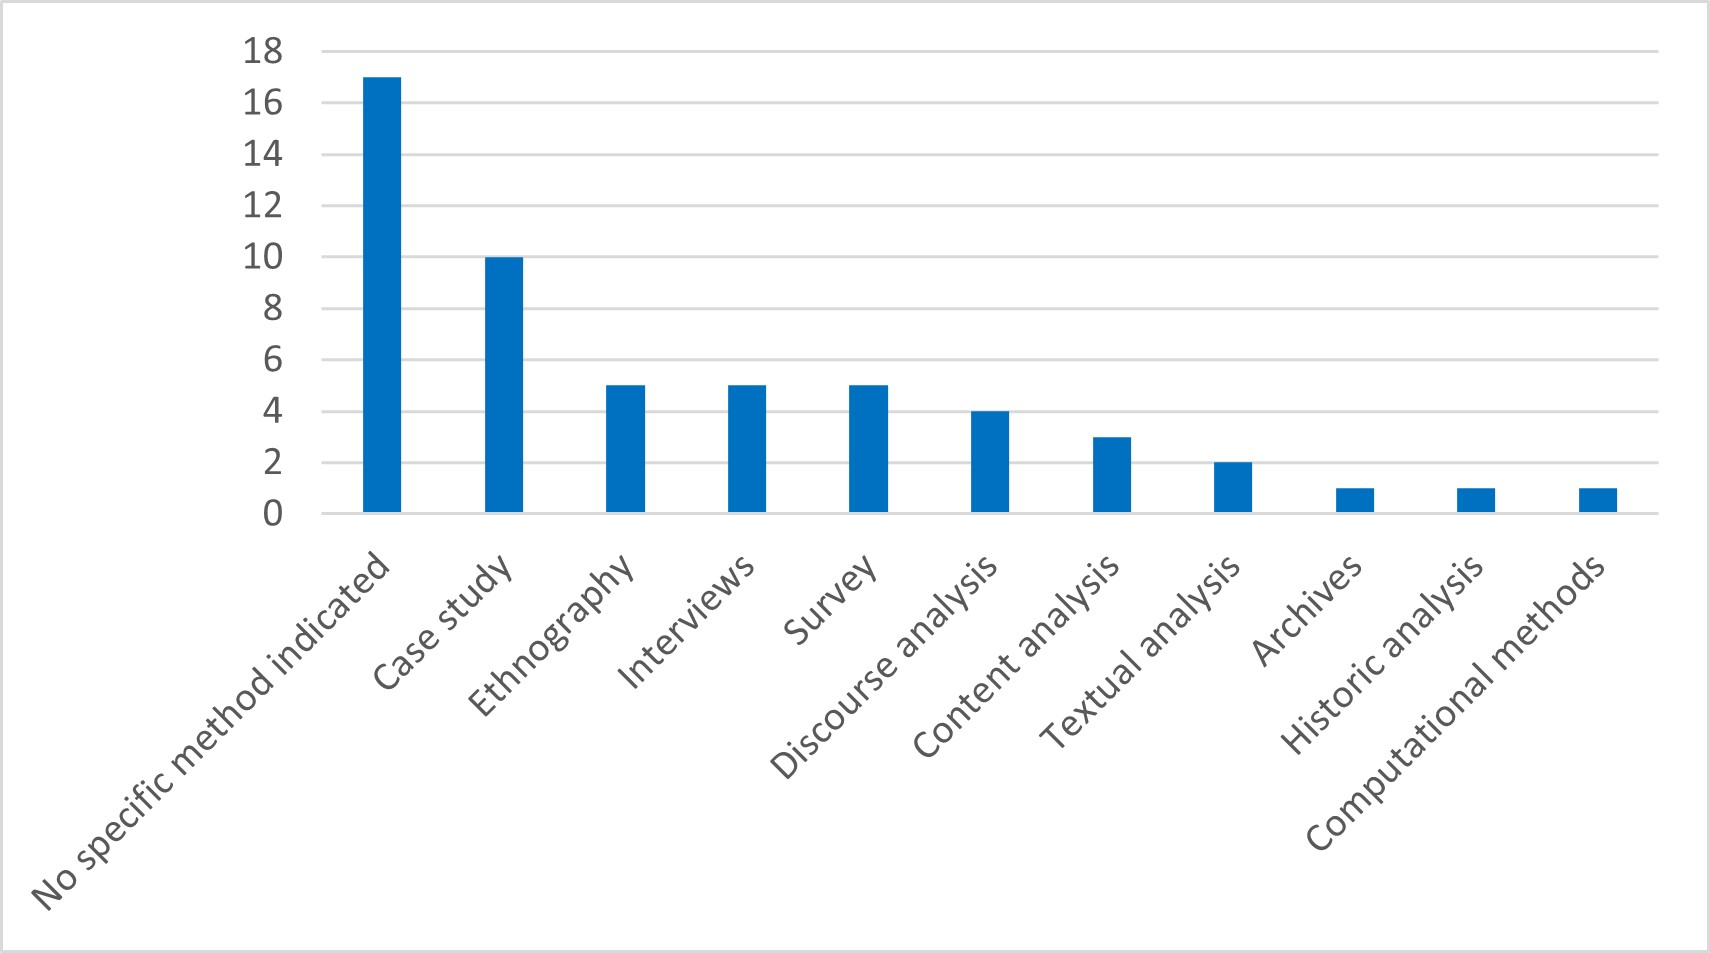 Bar graph showing frequency of most commonly mentioned methods in the sample of abstracts analyzed.